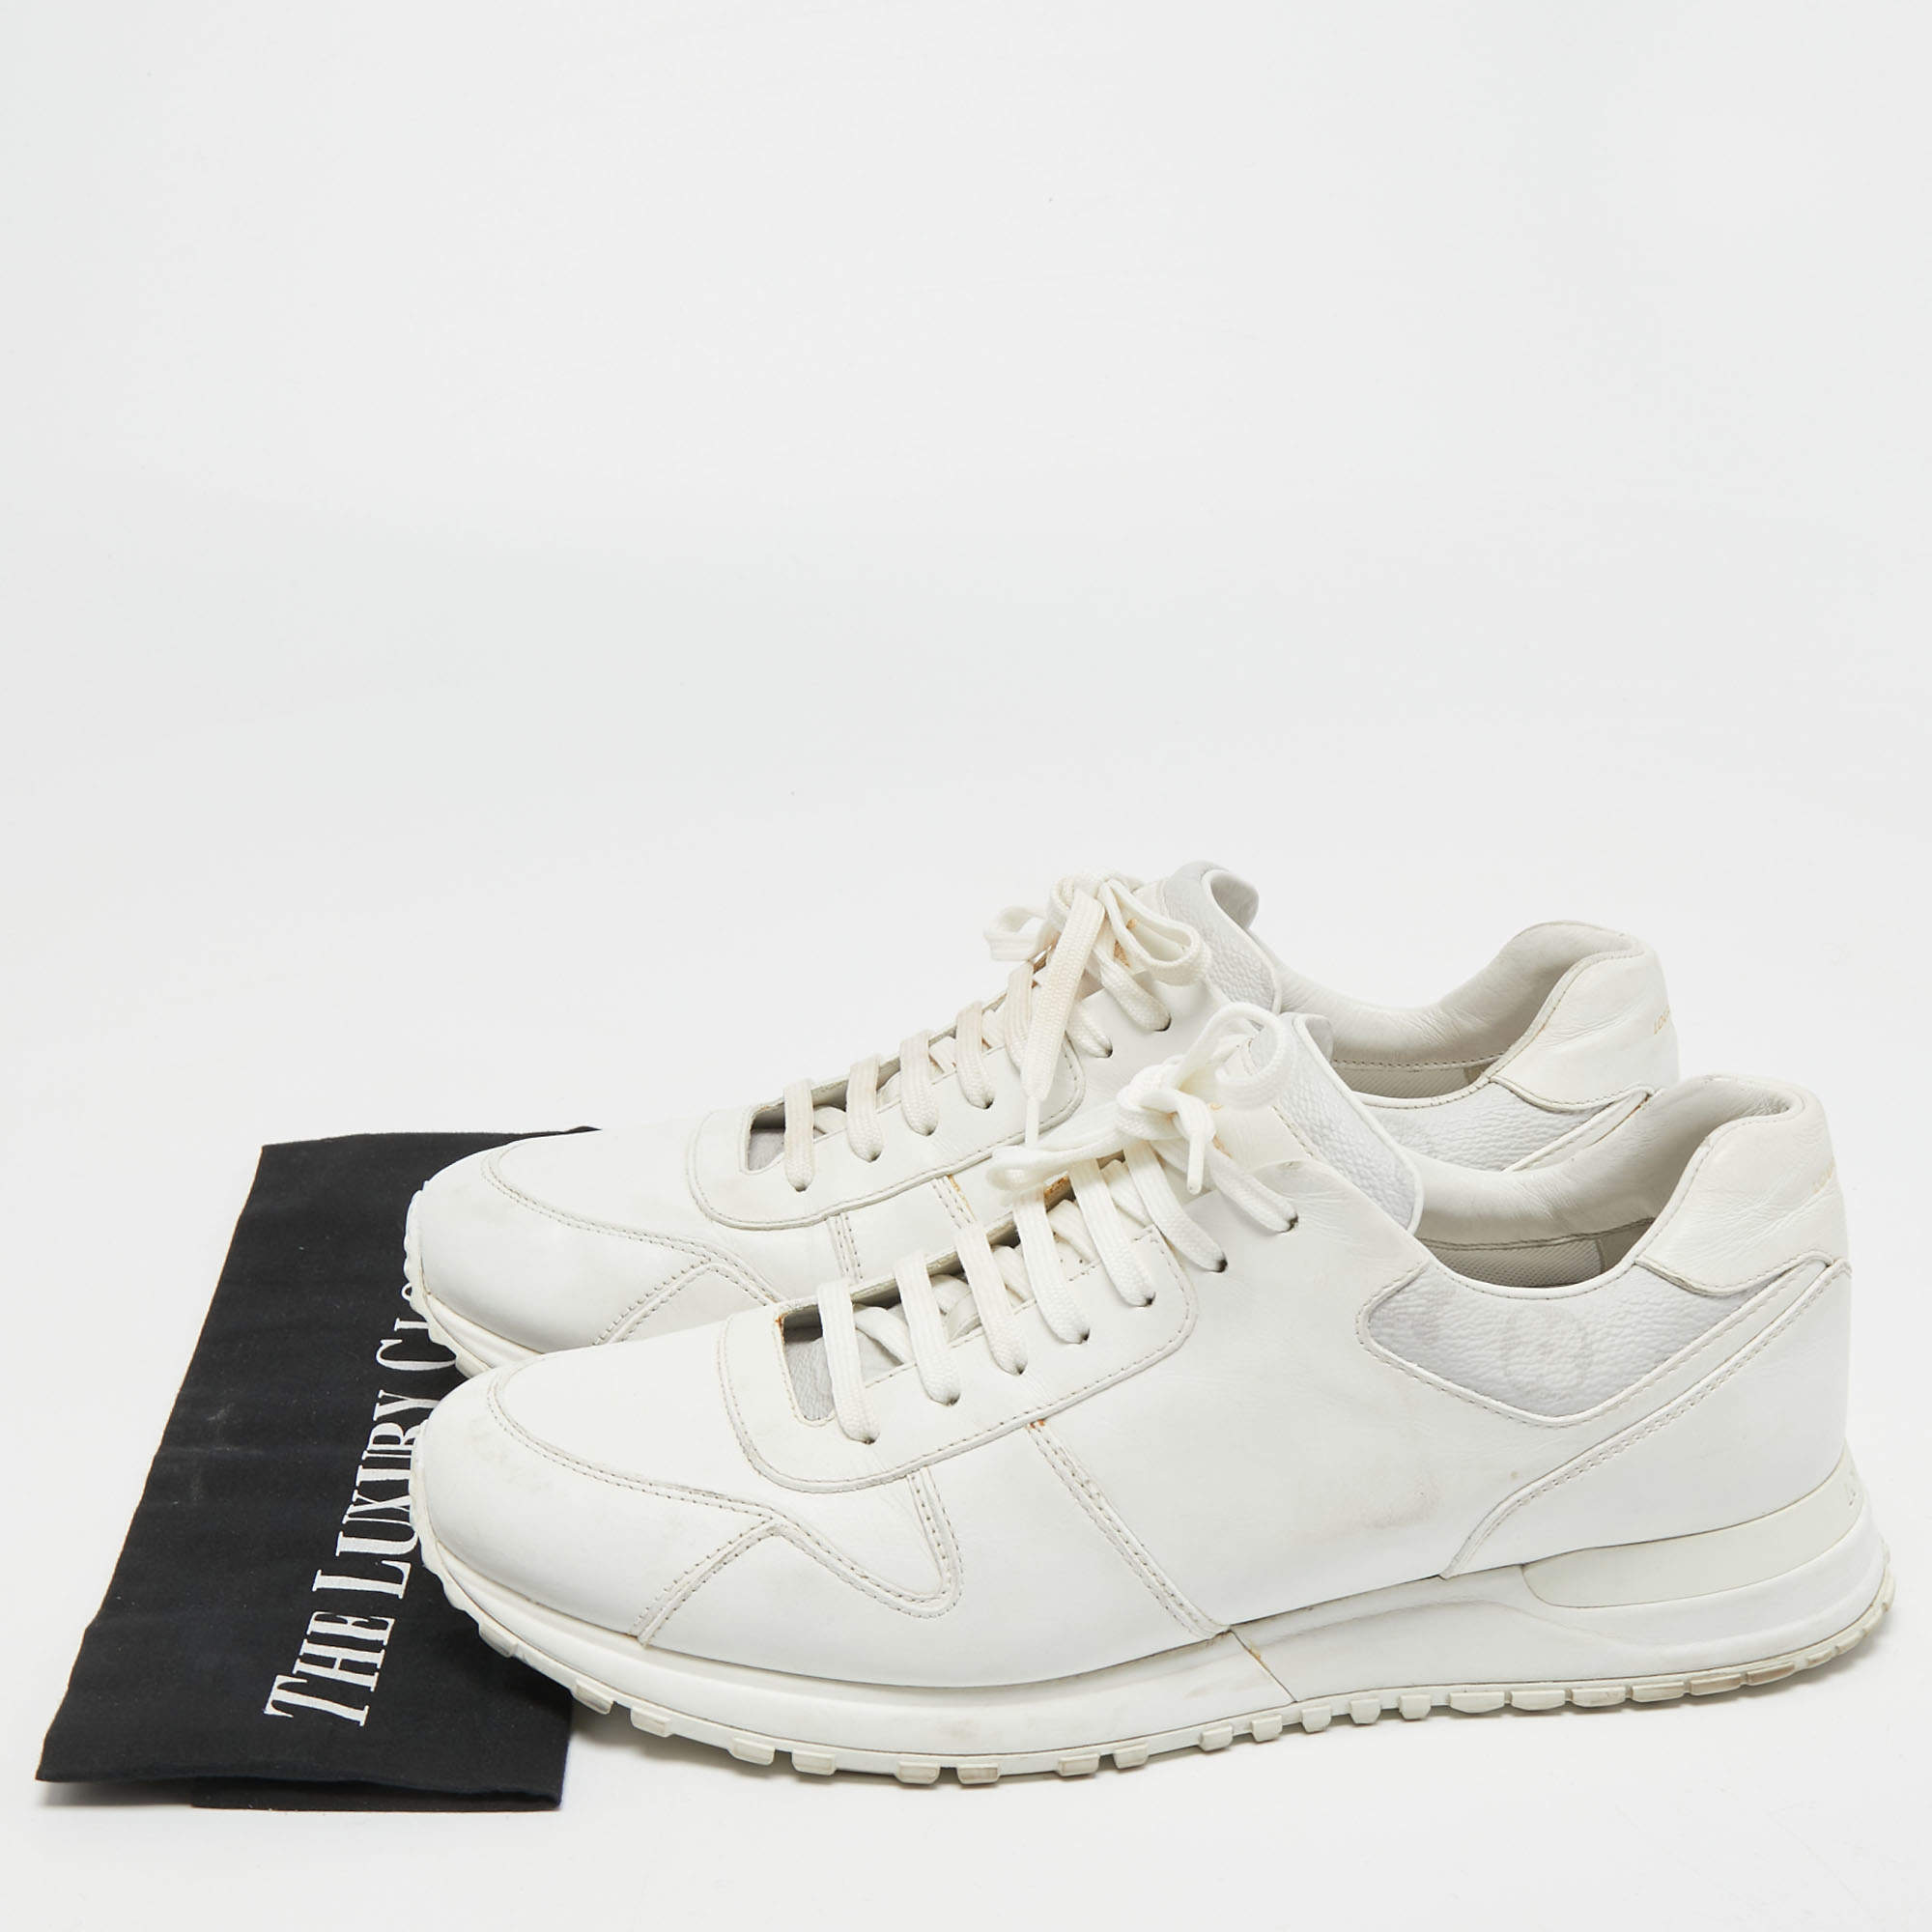 Run away leather trainers Louis Vuitton White size 35 EU in Leather -  31168042